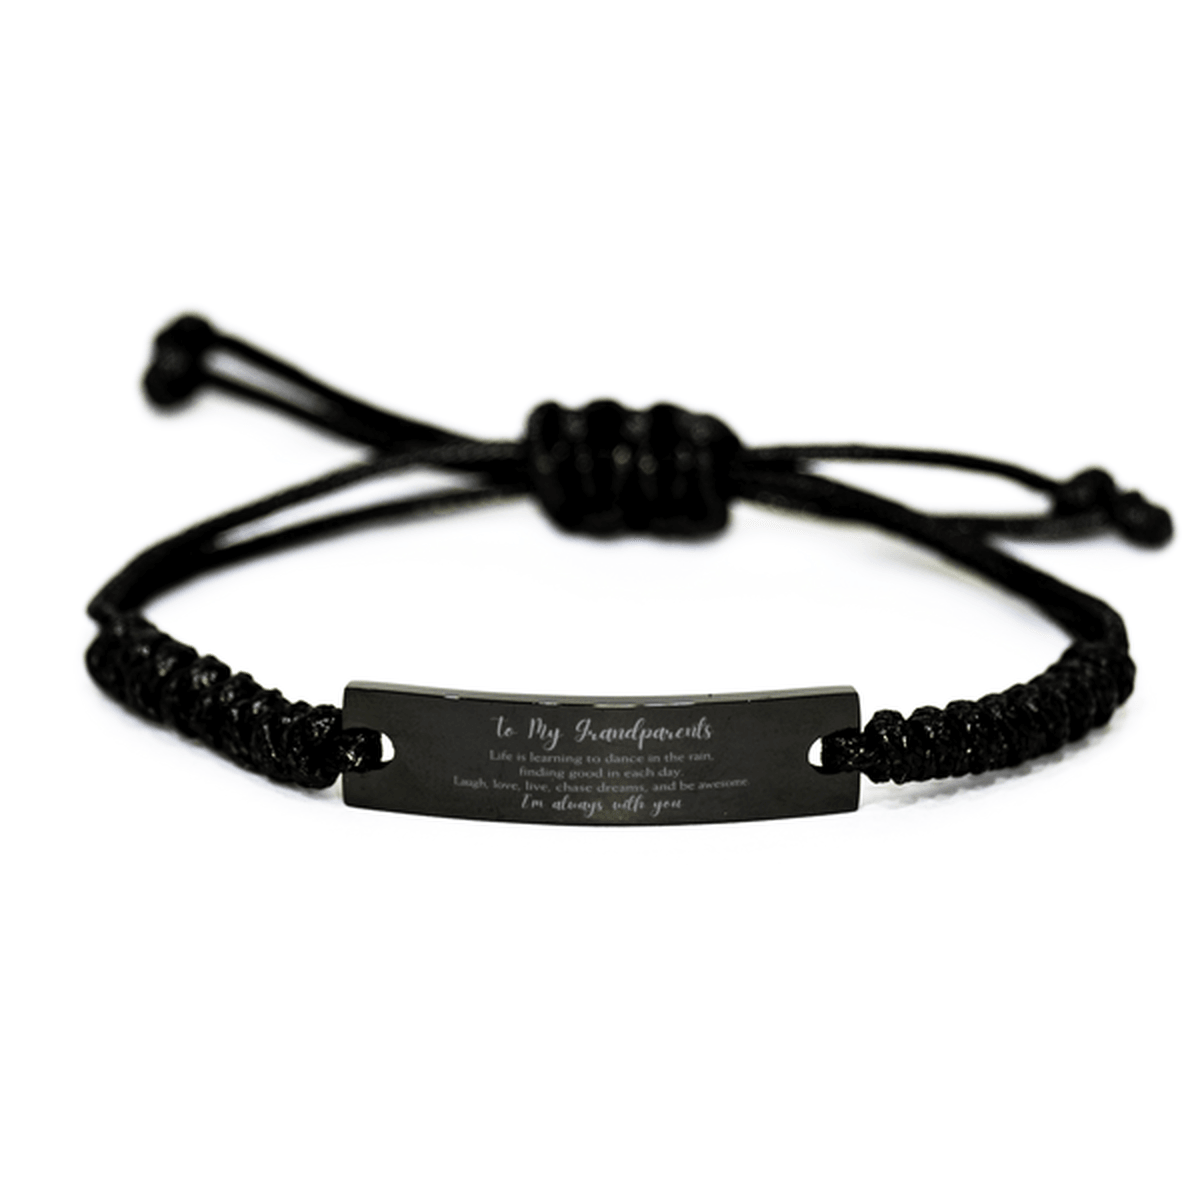 Grandparents Christmas Perfect Gifts, Grandparents Black Rope Bracelet, Motivational Grandparents Engraved Gifts, Birthday Gifts For Grandparents, To My Grandparents Life is learning to dance in the rain, finding good in each day. I'm always with you